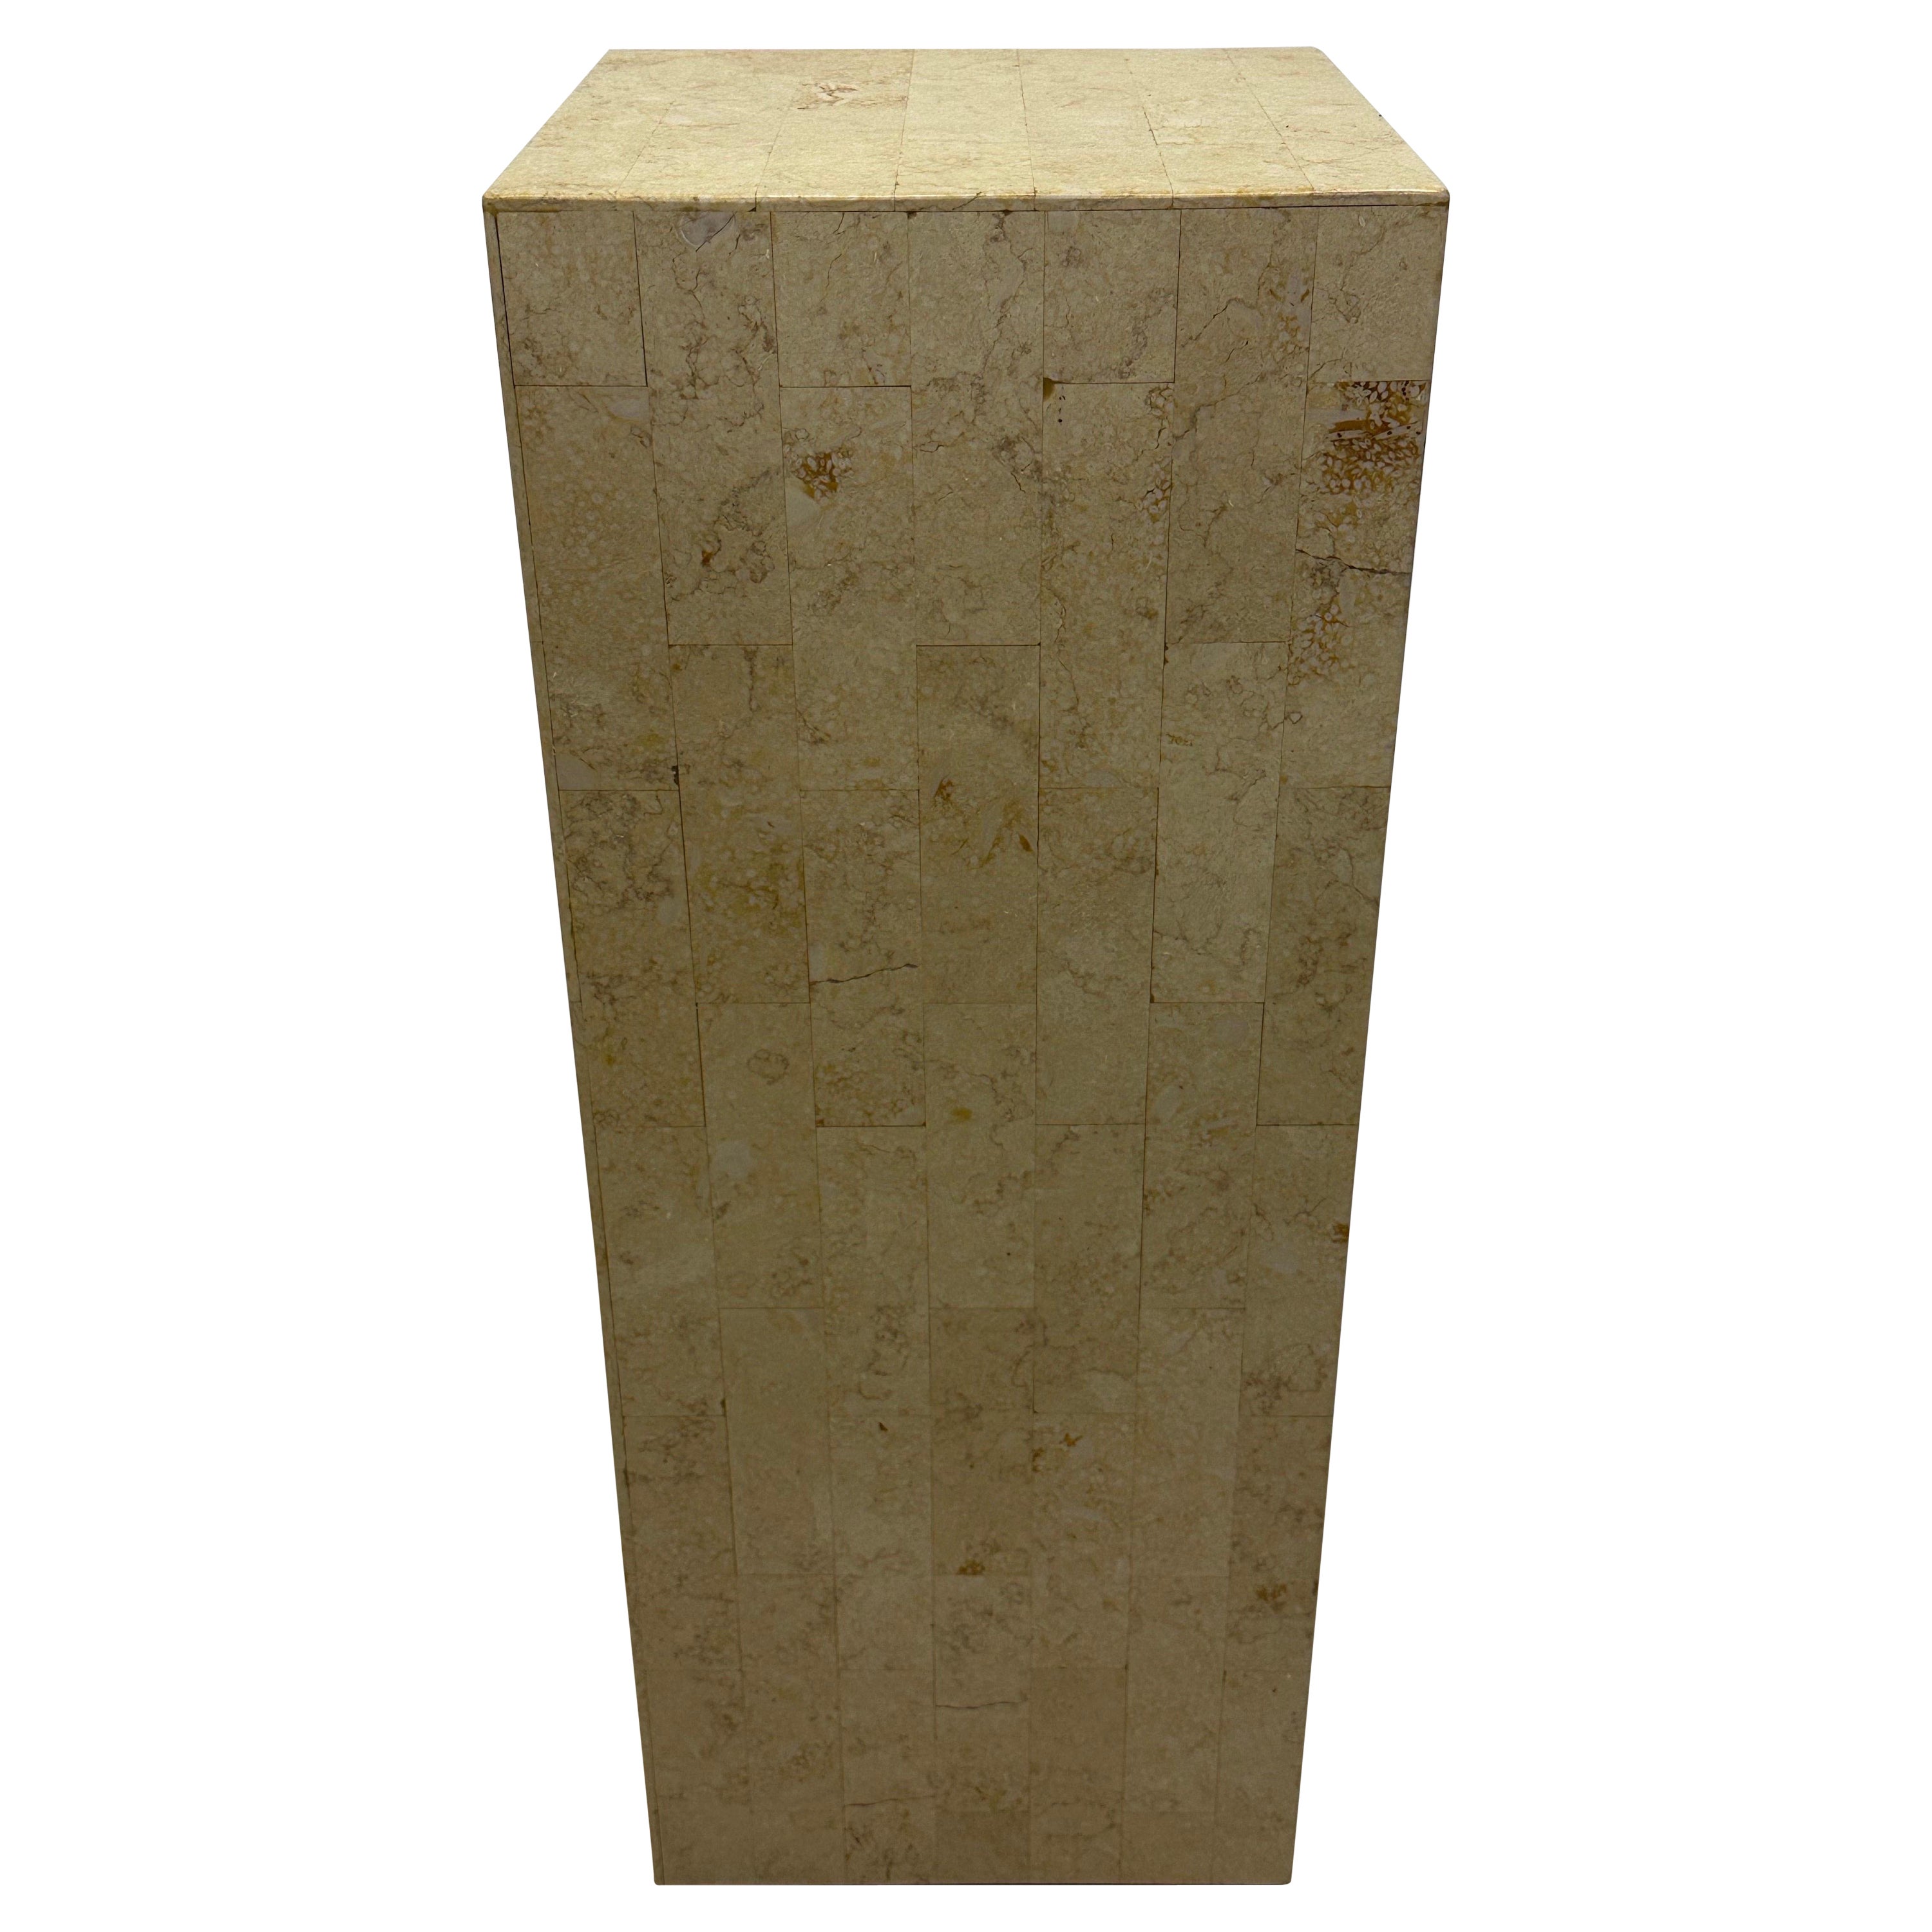 Midcentury Tessellated Stone Pedestal Table, 1970s For Sale